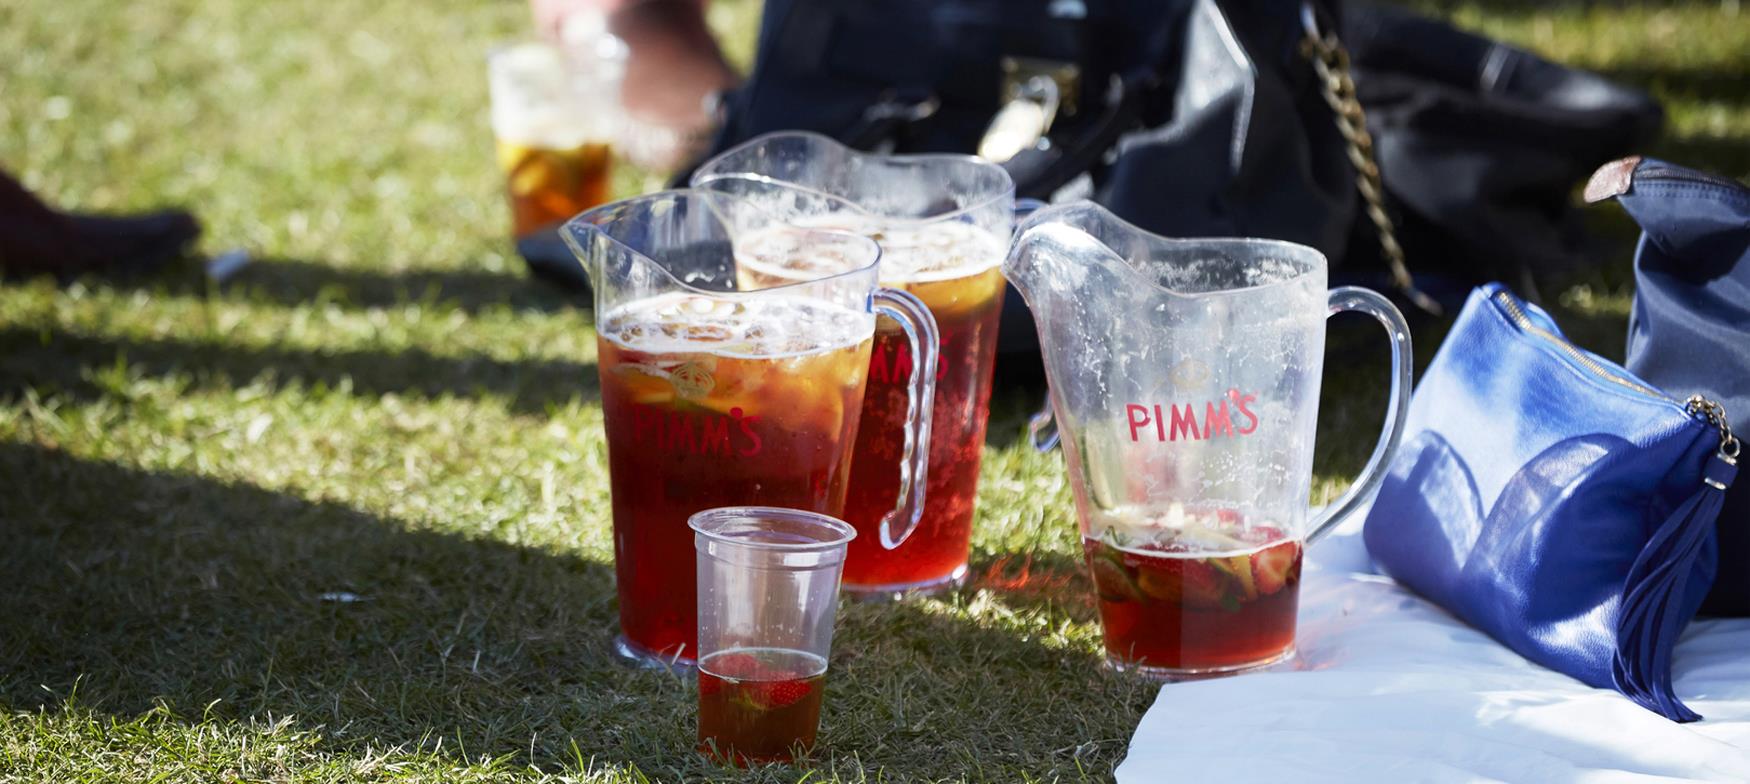 A pitcher of Pimms